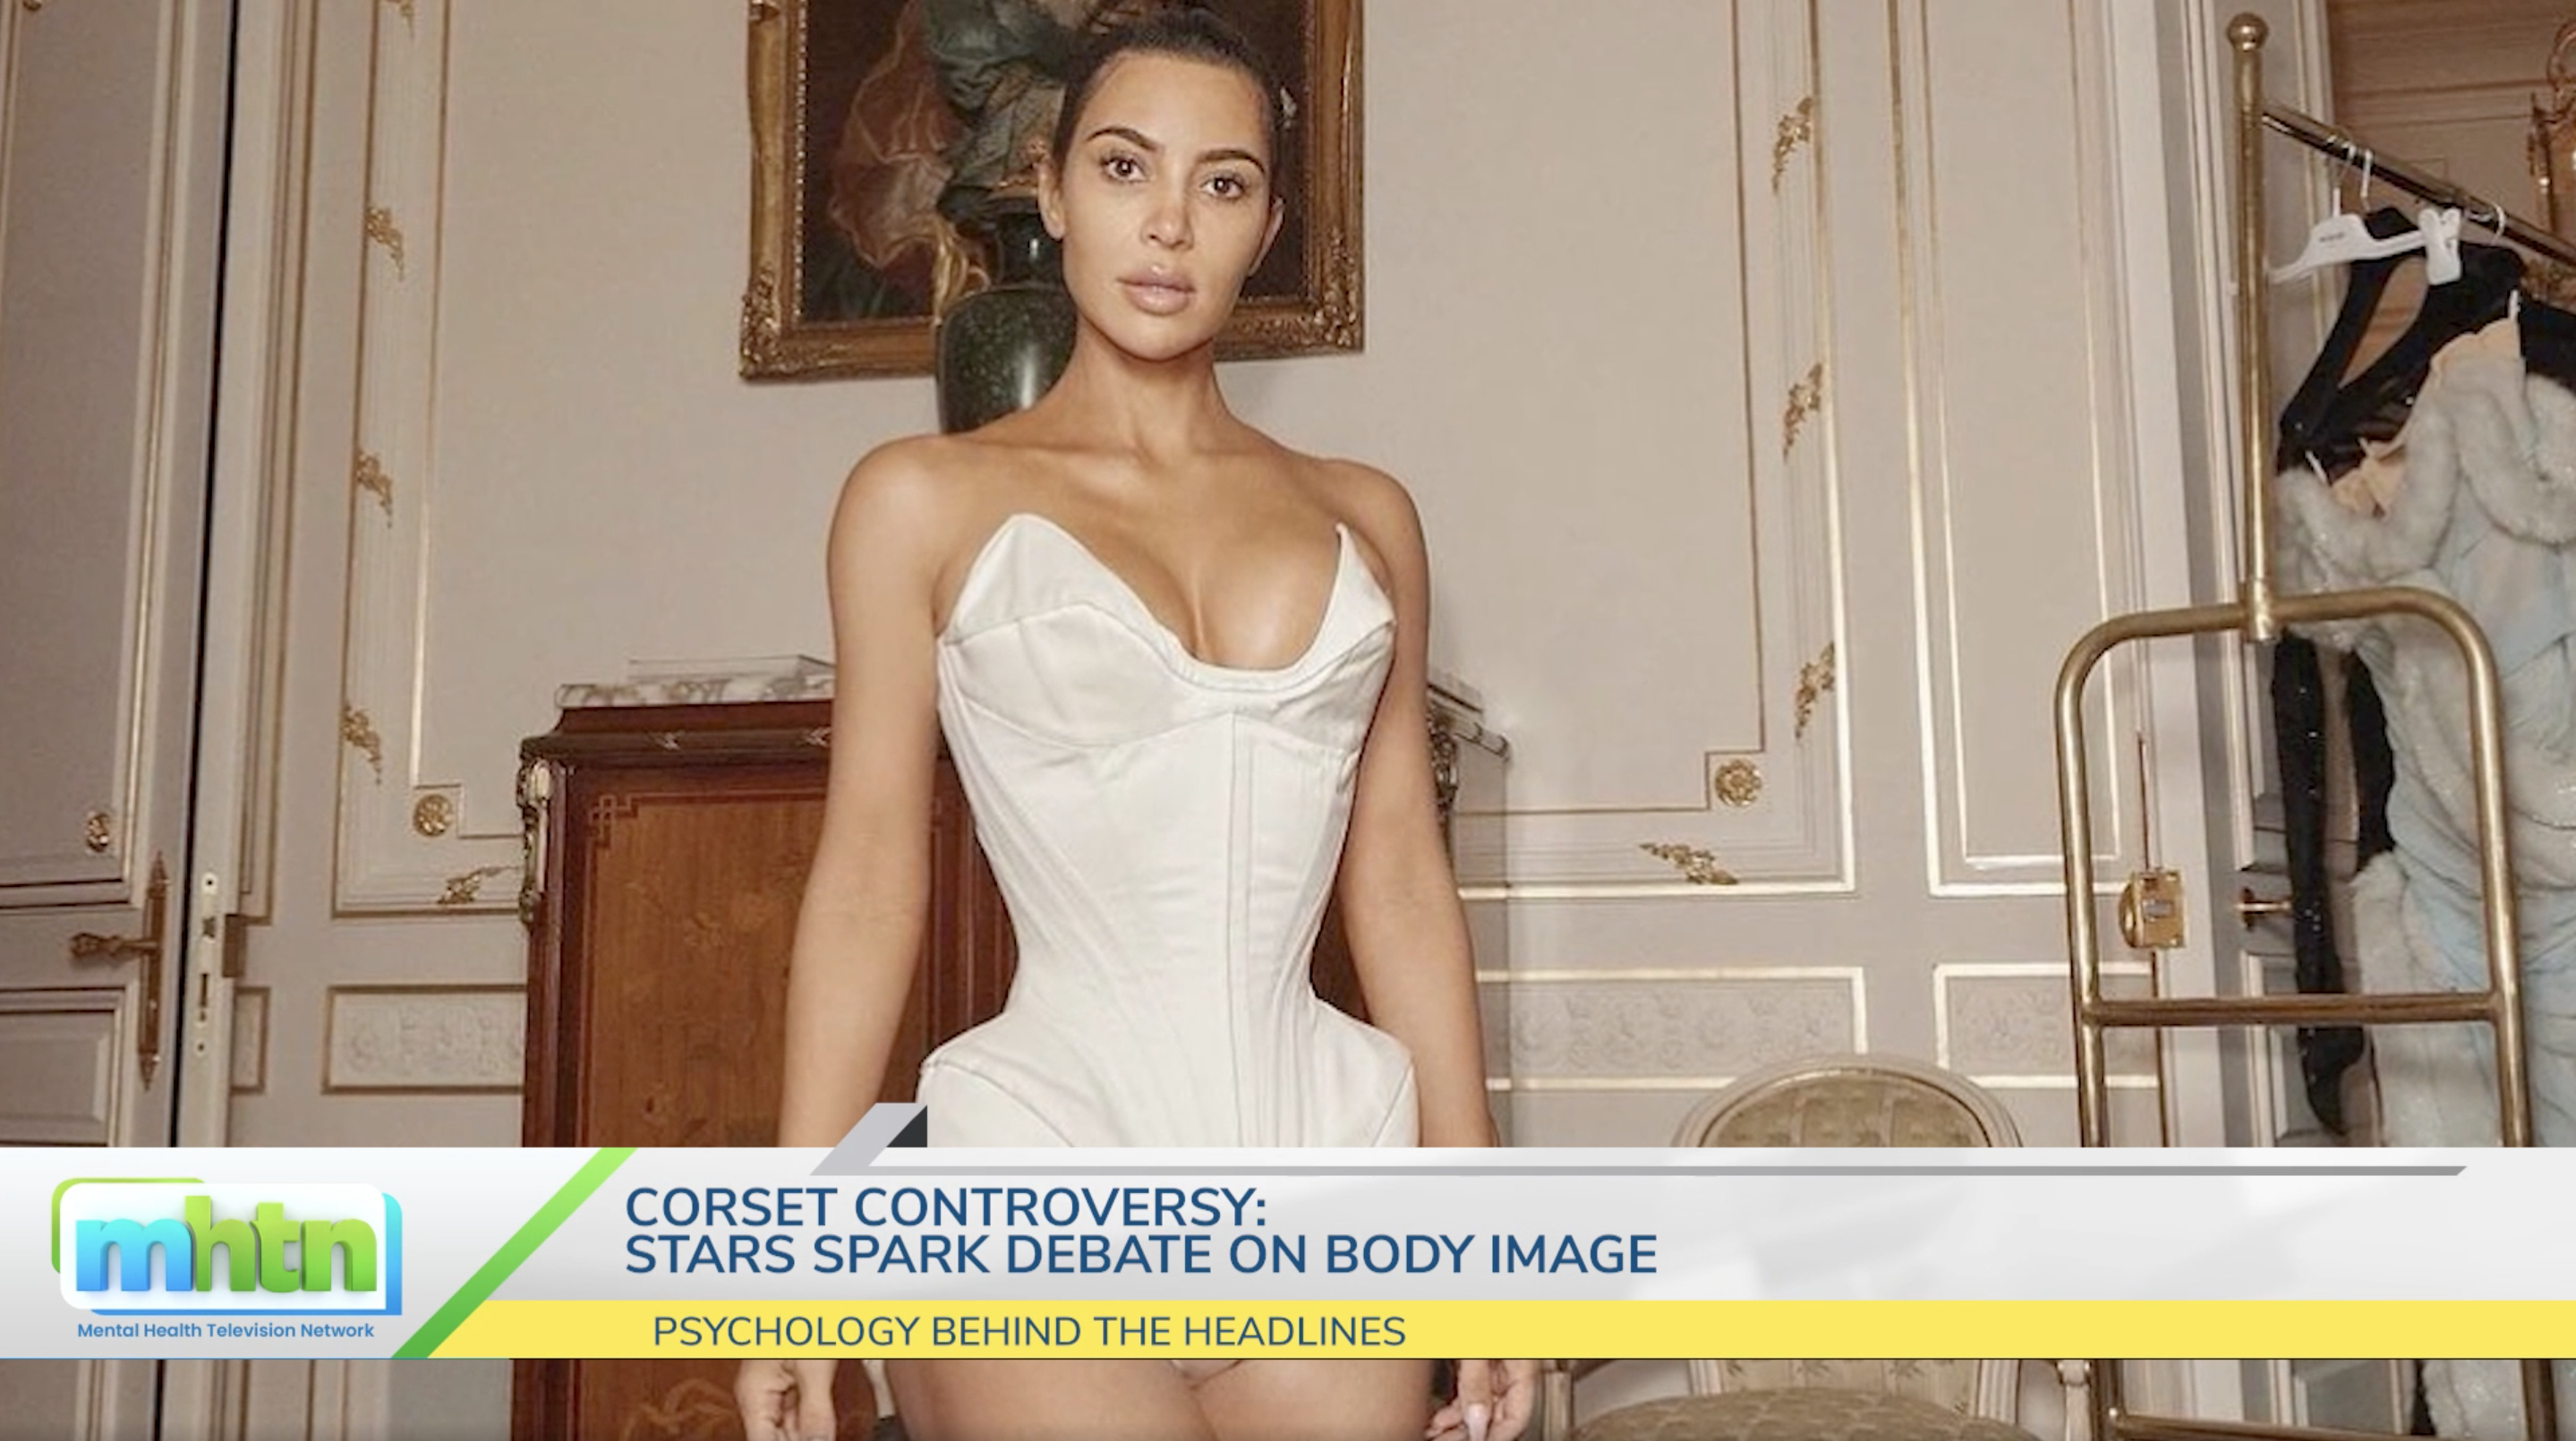 Are Celebrities Shaping Our Body Image Standards? Exploring the Corset Controversy